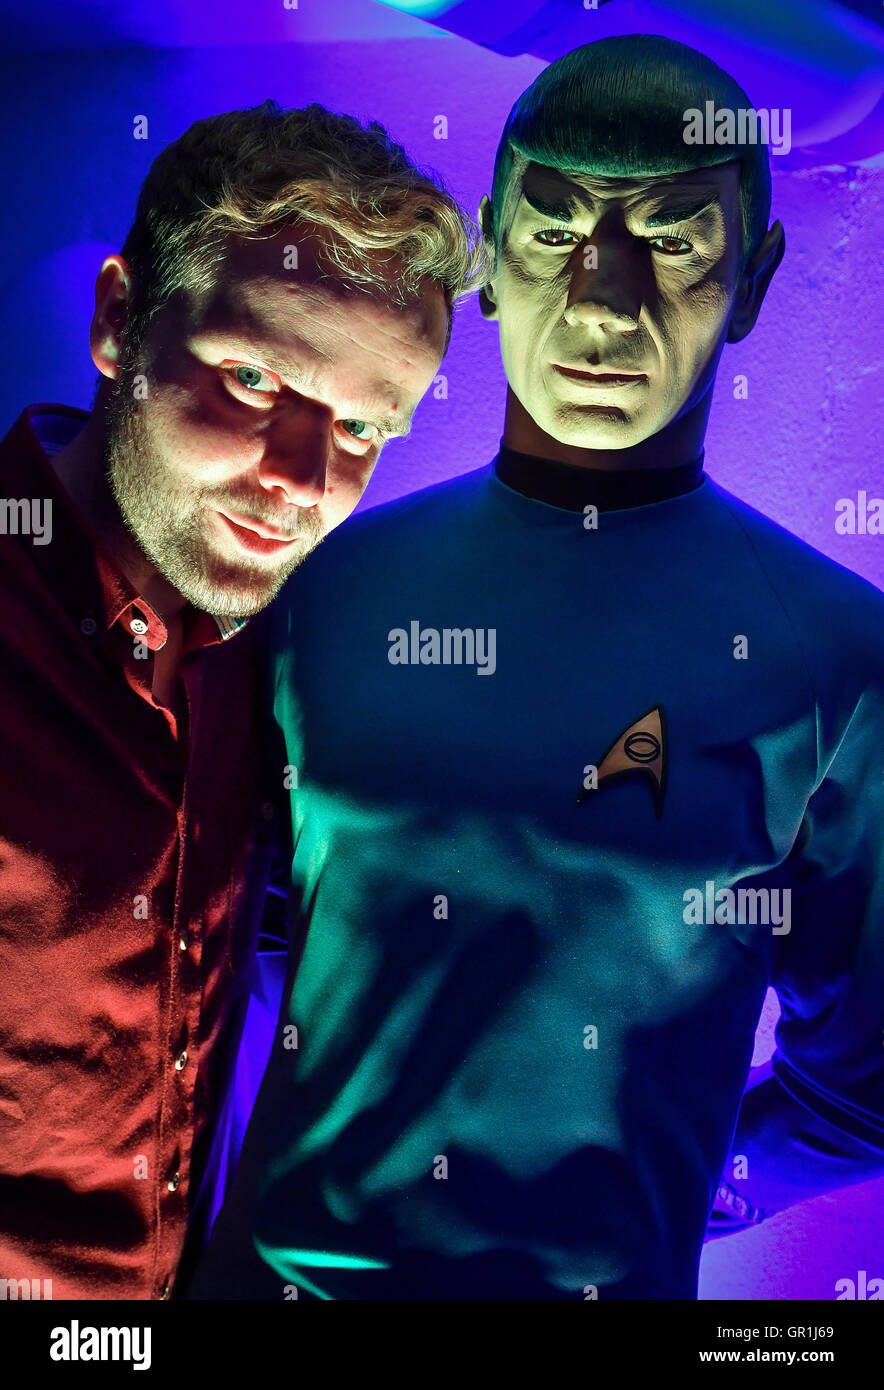 TV journalist and dubbing actor Benjamin Stoewe standing next to a statue of Leonard Nimoy as Mister Spock at his private Star Trek museum 'Raumschiff Eberswalde' in Eberswalde, Germany, 6 September 2016. The first episode of the science-fiction series Star Trek ran on 8 September 1966. The possibly smallest Star Trek museum can be found in Eberweswalde on 17.01 square meters - inspired by the registry number of the starship Enterprise, NCC-1701. The exhibition consists of original objects from the show, costumes, masks and models from the history of Star Trek. The 1701 museum is currently bei Stock Photo